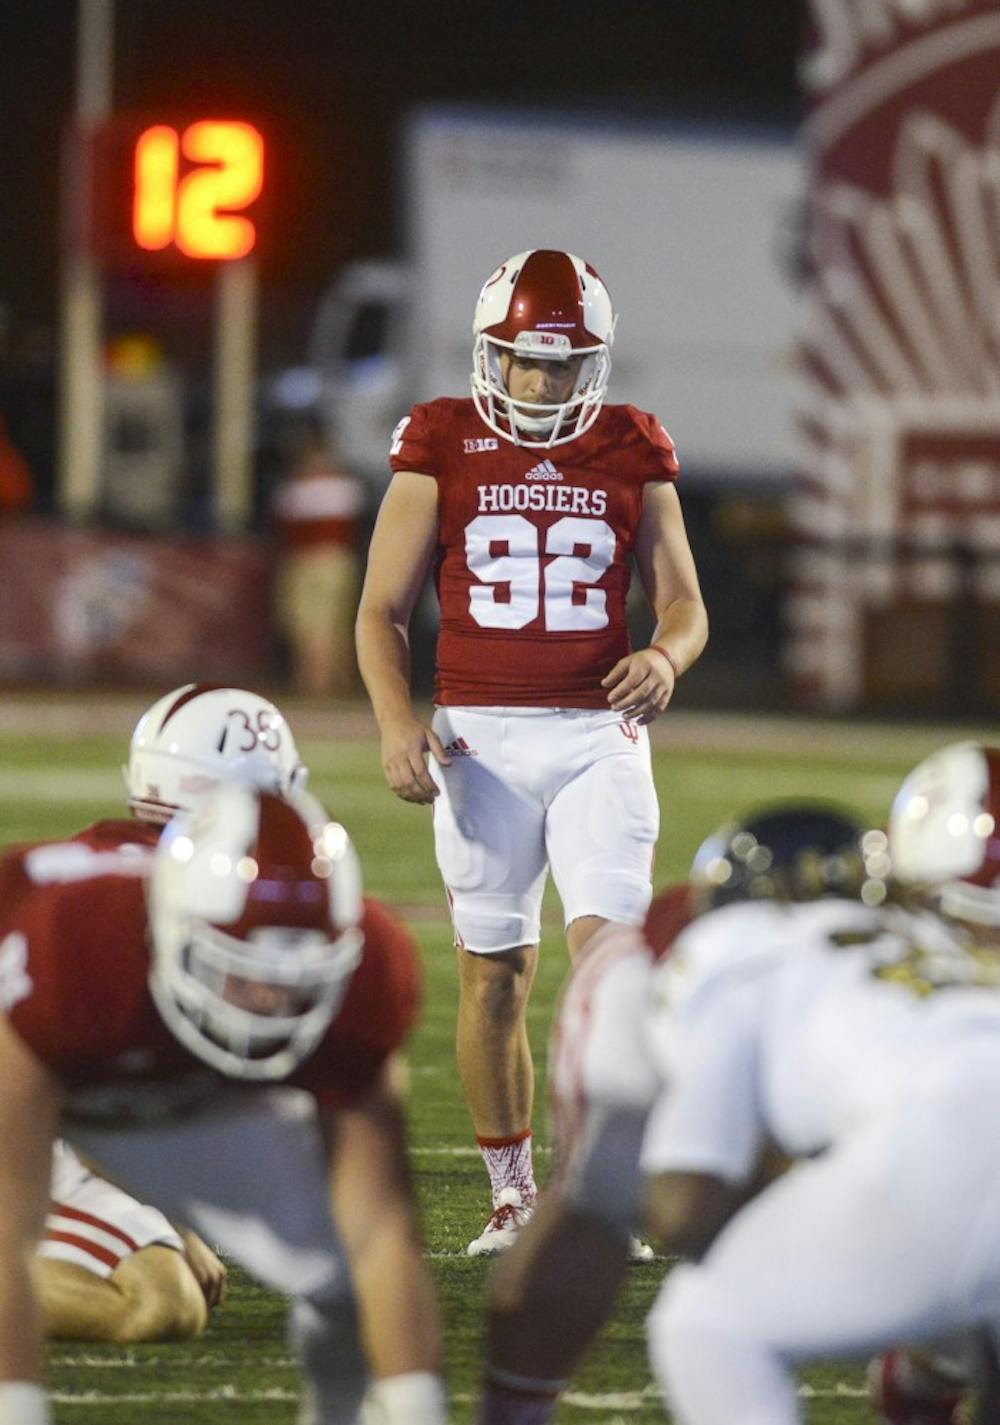 Red-shirt sophomore kicker Griffin Oakes prepares to kick a field goal during the game against Florida International on Sept.12 at Memorial Stadium. The Hoosiers won, 36-22.